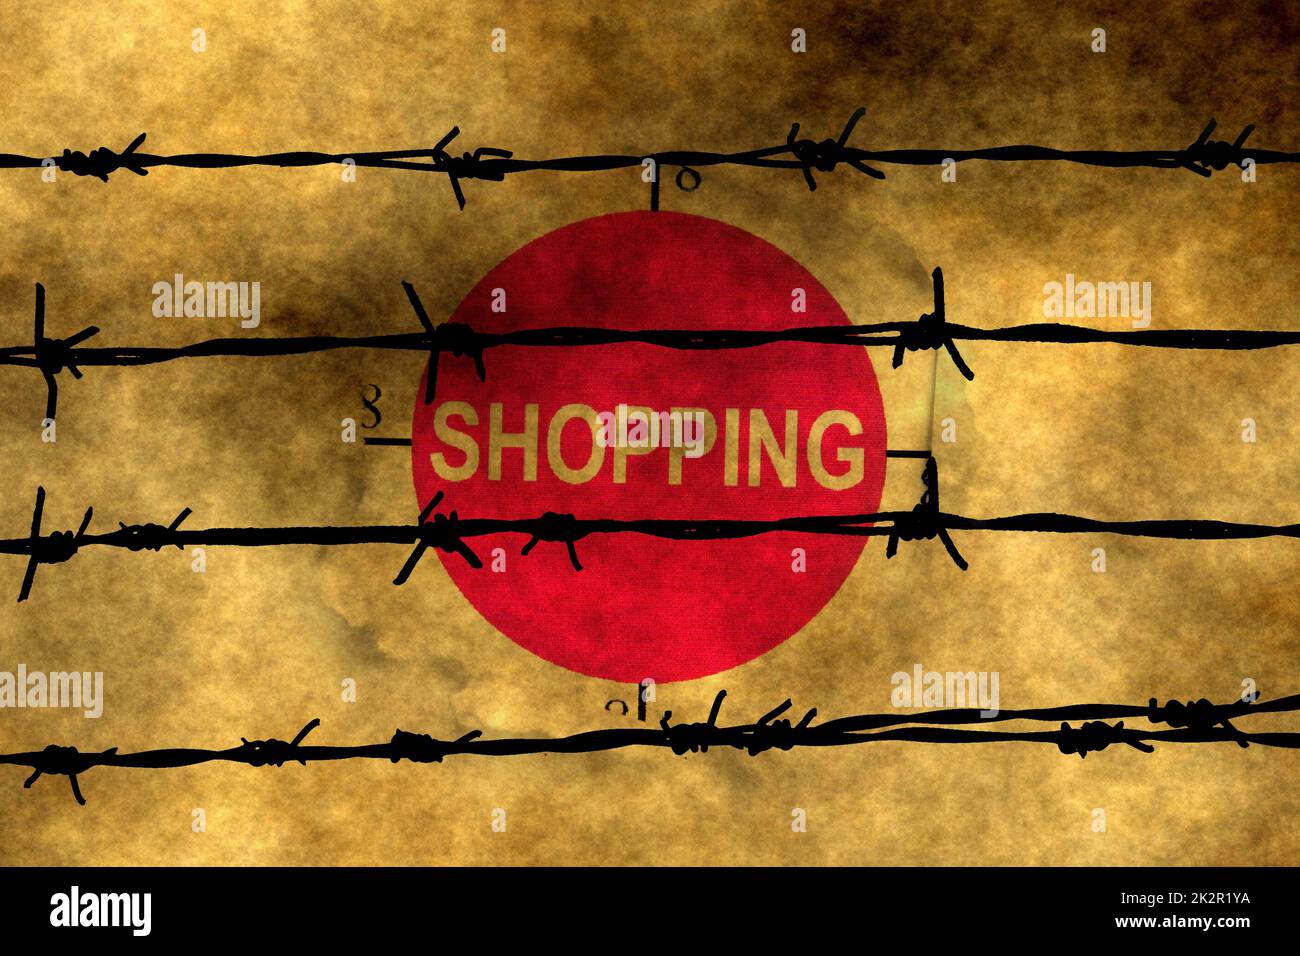 Shopping paper hole concept against barbwire Stock Photo